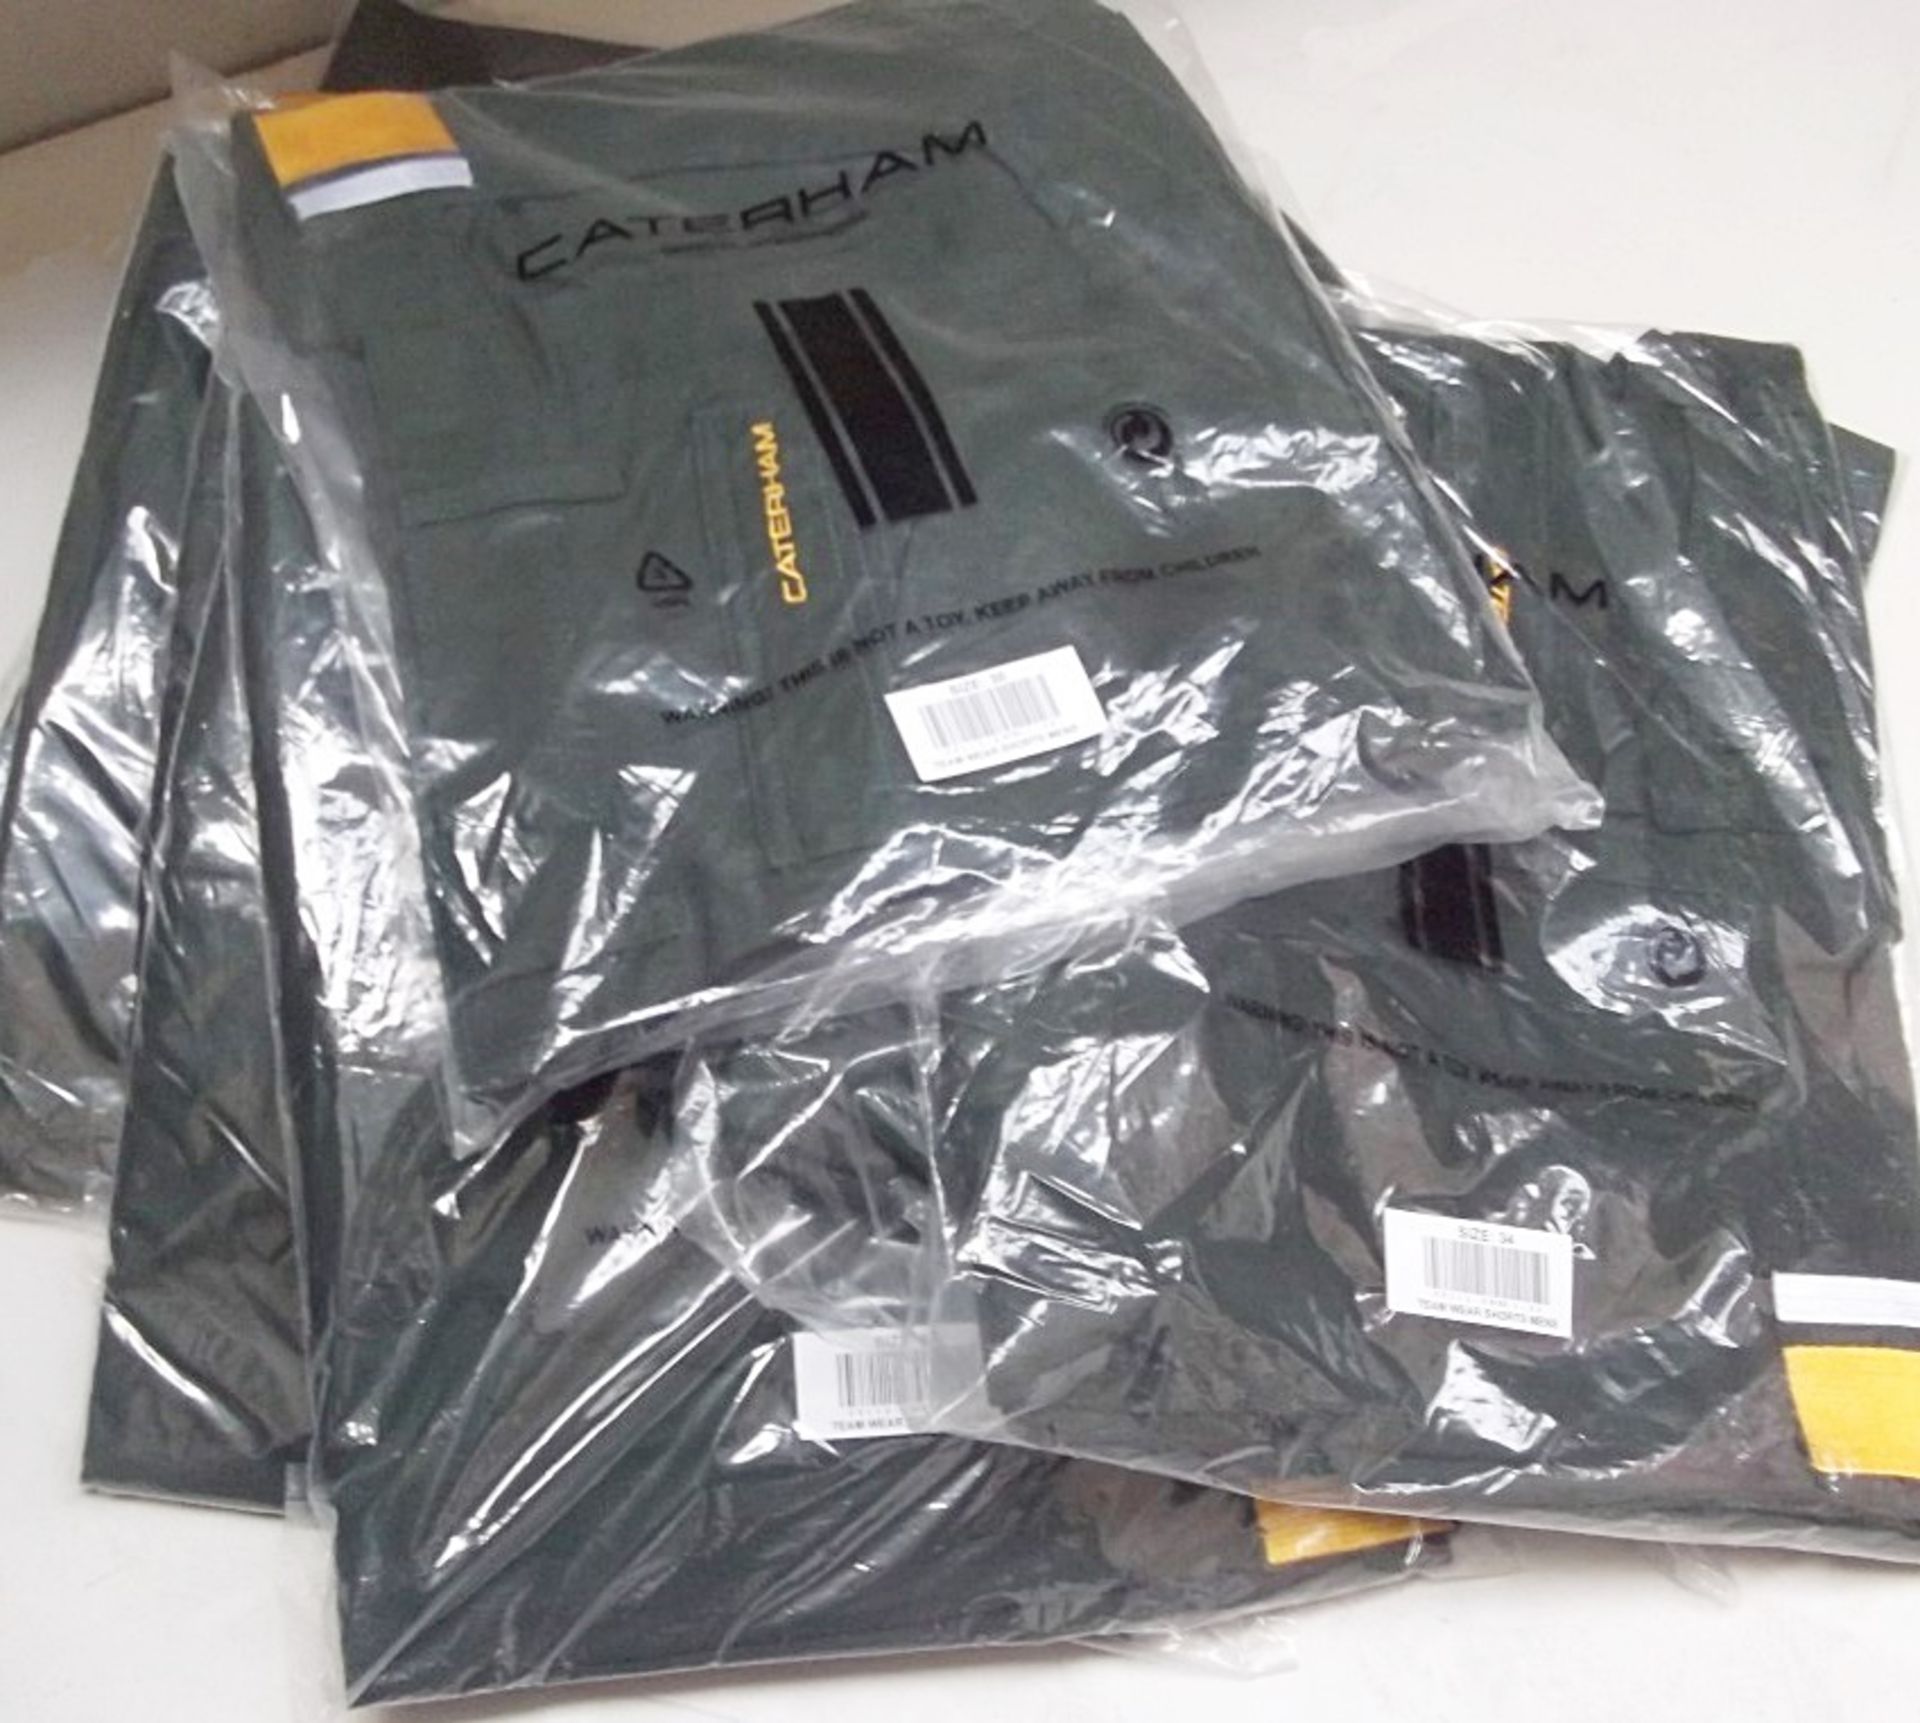 10 x Pairs Of Caterham F1 Pit Crew Shorts - Mostly 34 Waist - Ideal Casual / Work Wear - BRAND NEW &